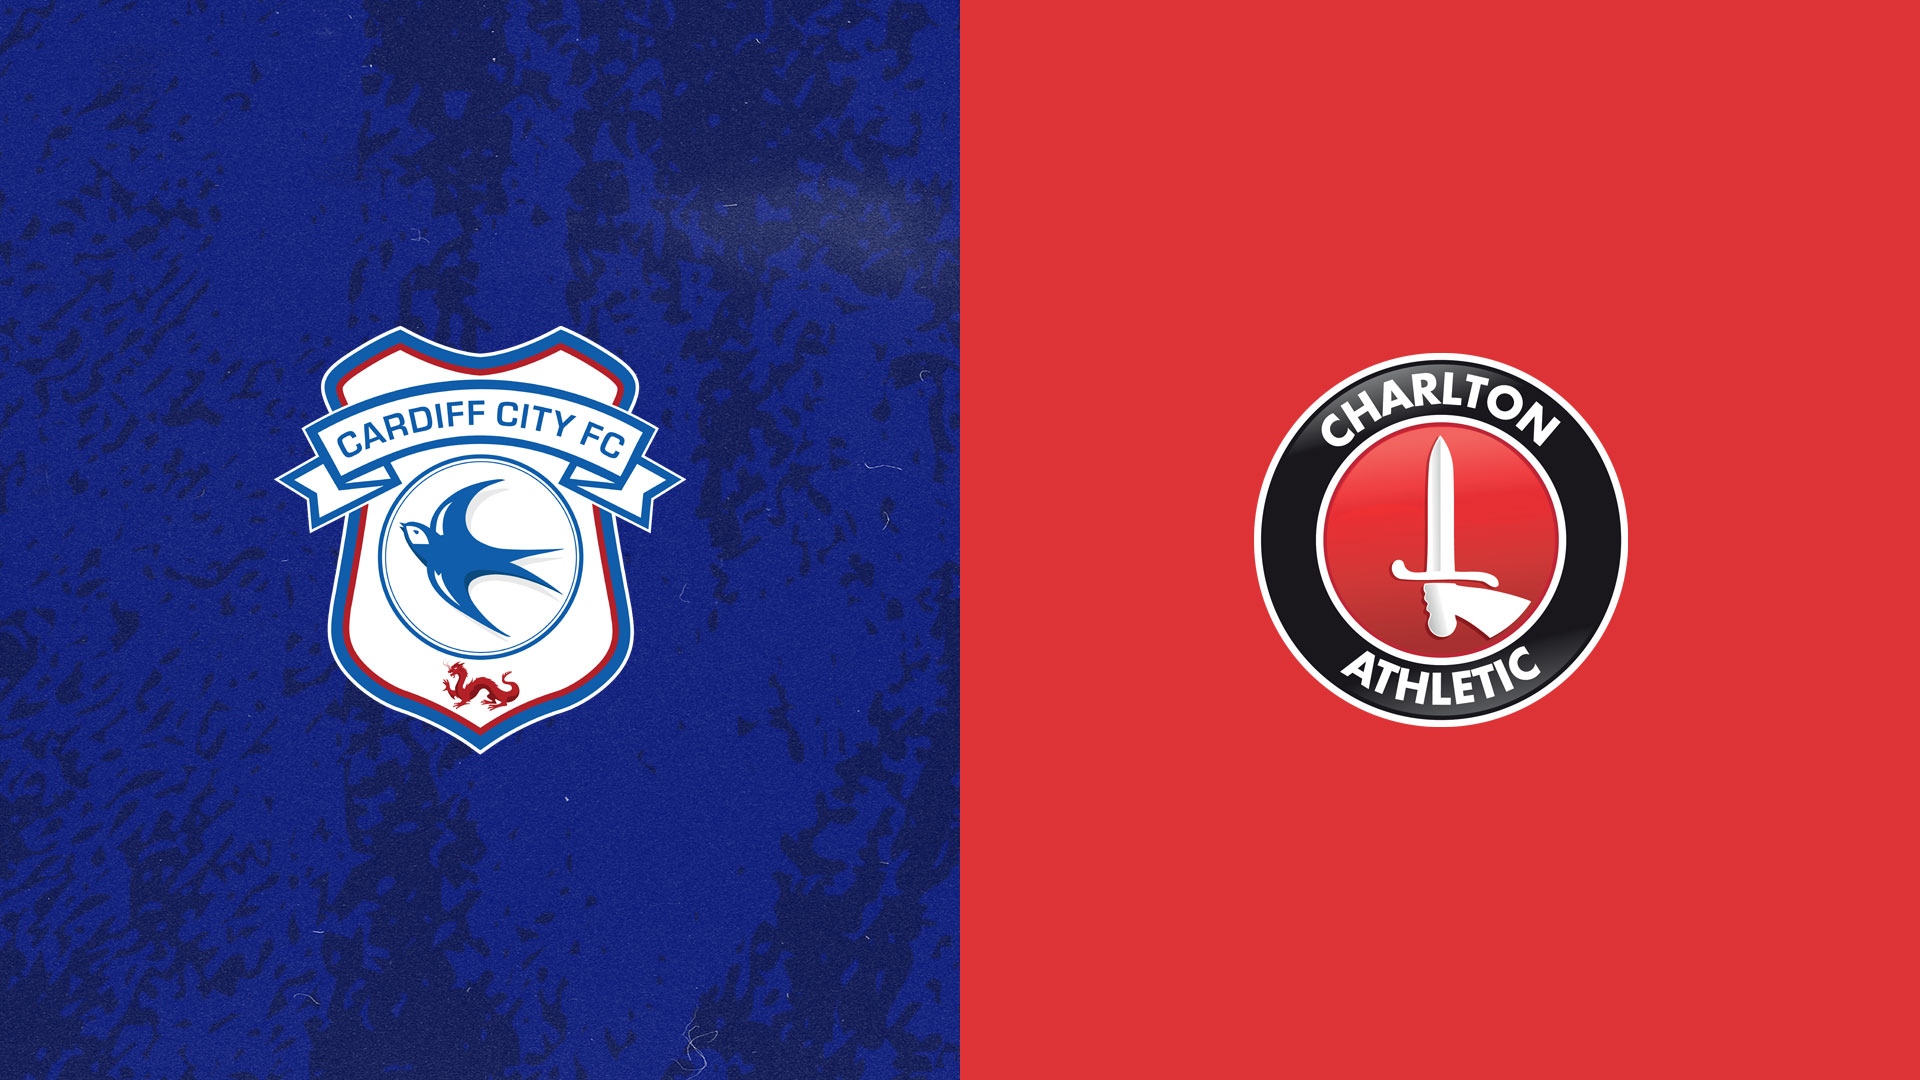 The Bluebirds host Charlton Athletic at home...